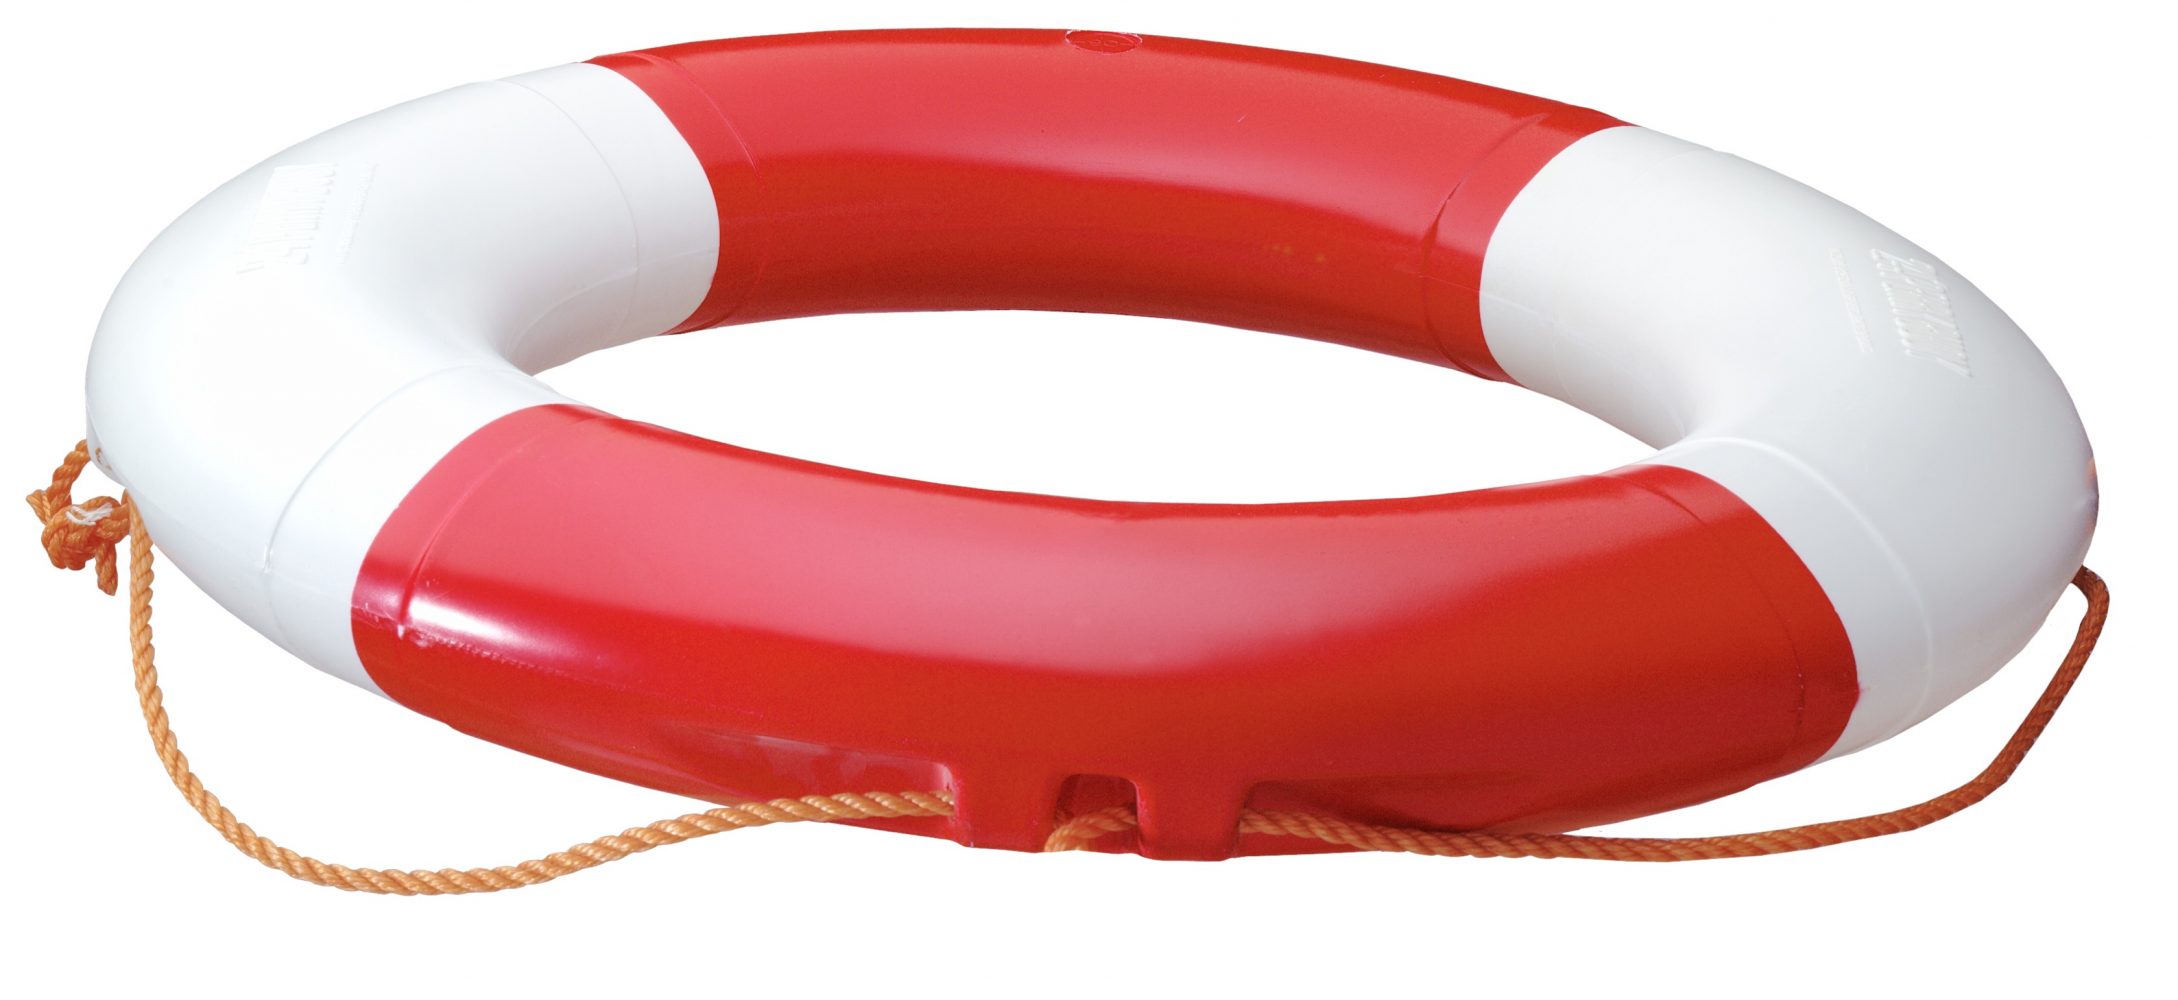 Red and white life buoy with rope.